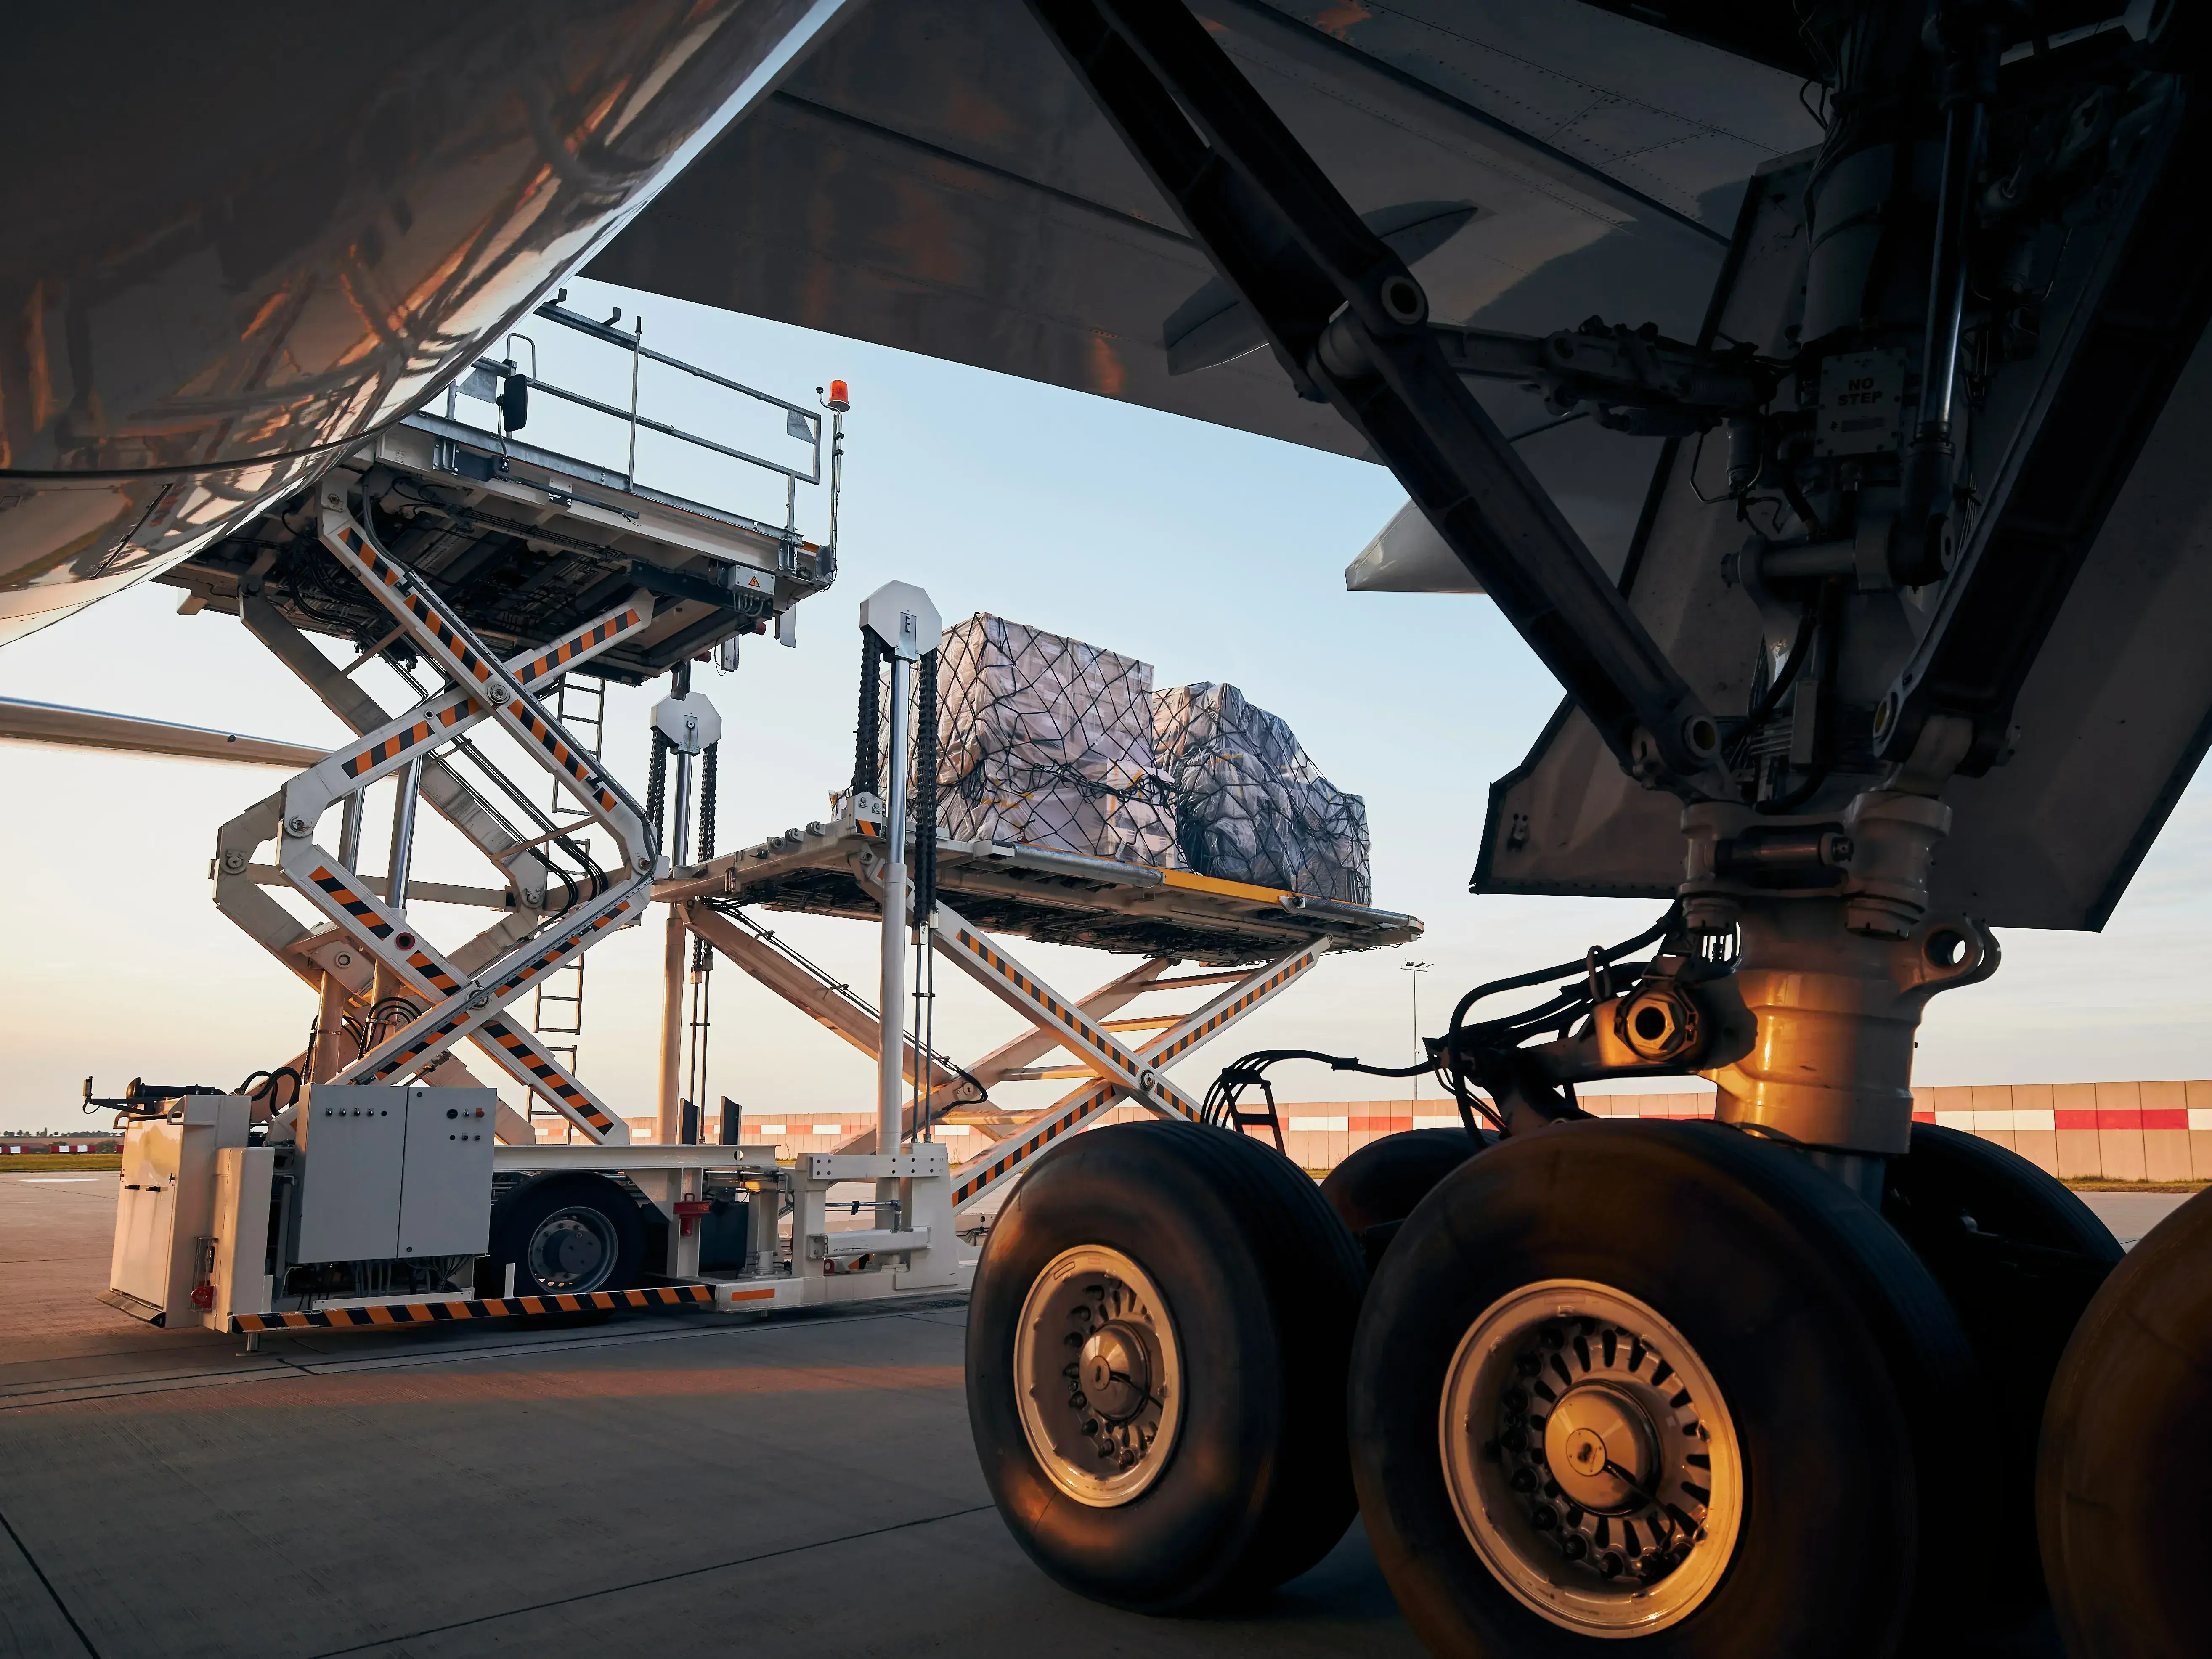 Cargo being loaded into an aircraft with a lift